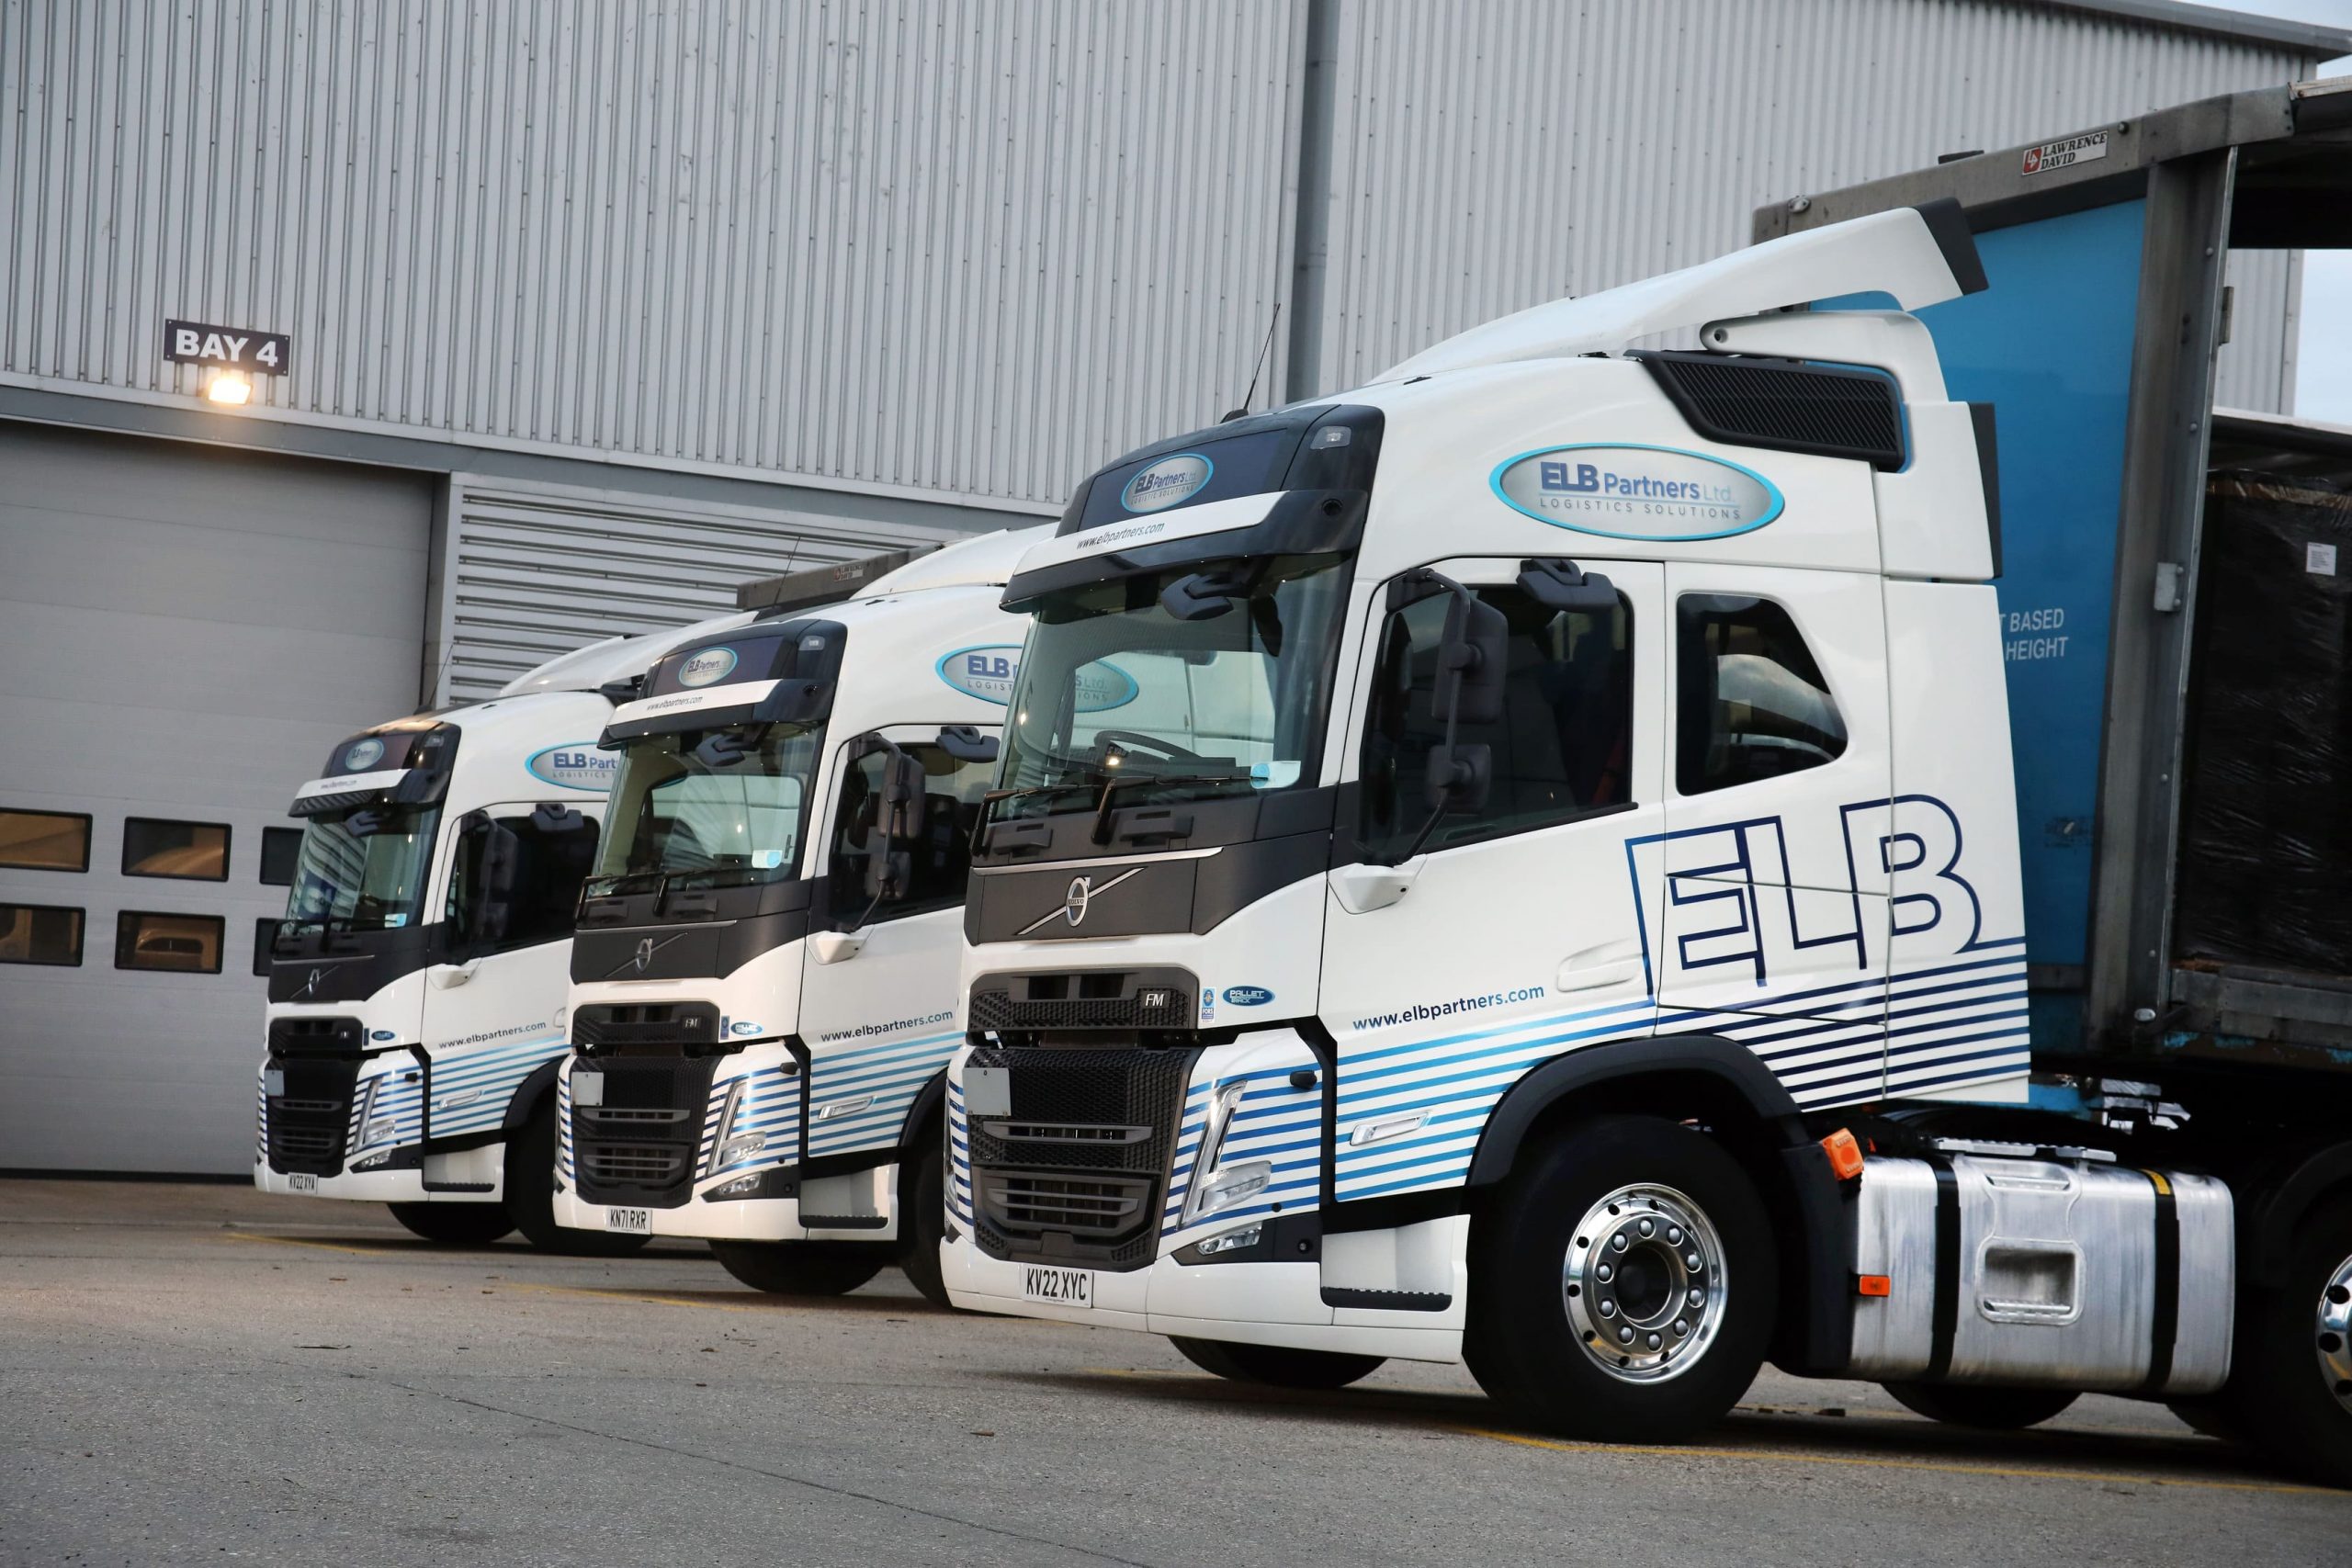 ELB Partners' fleet of HGVs has achieved FORS Gold accreditation